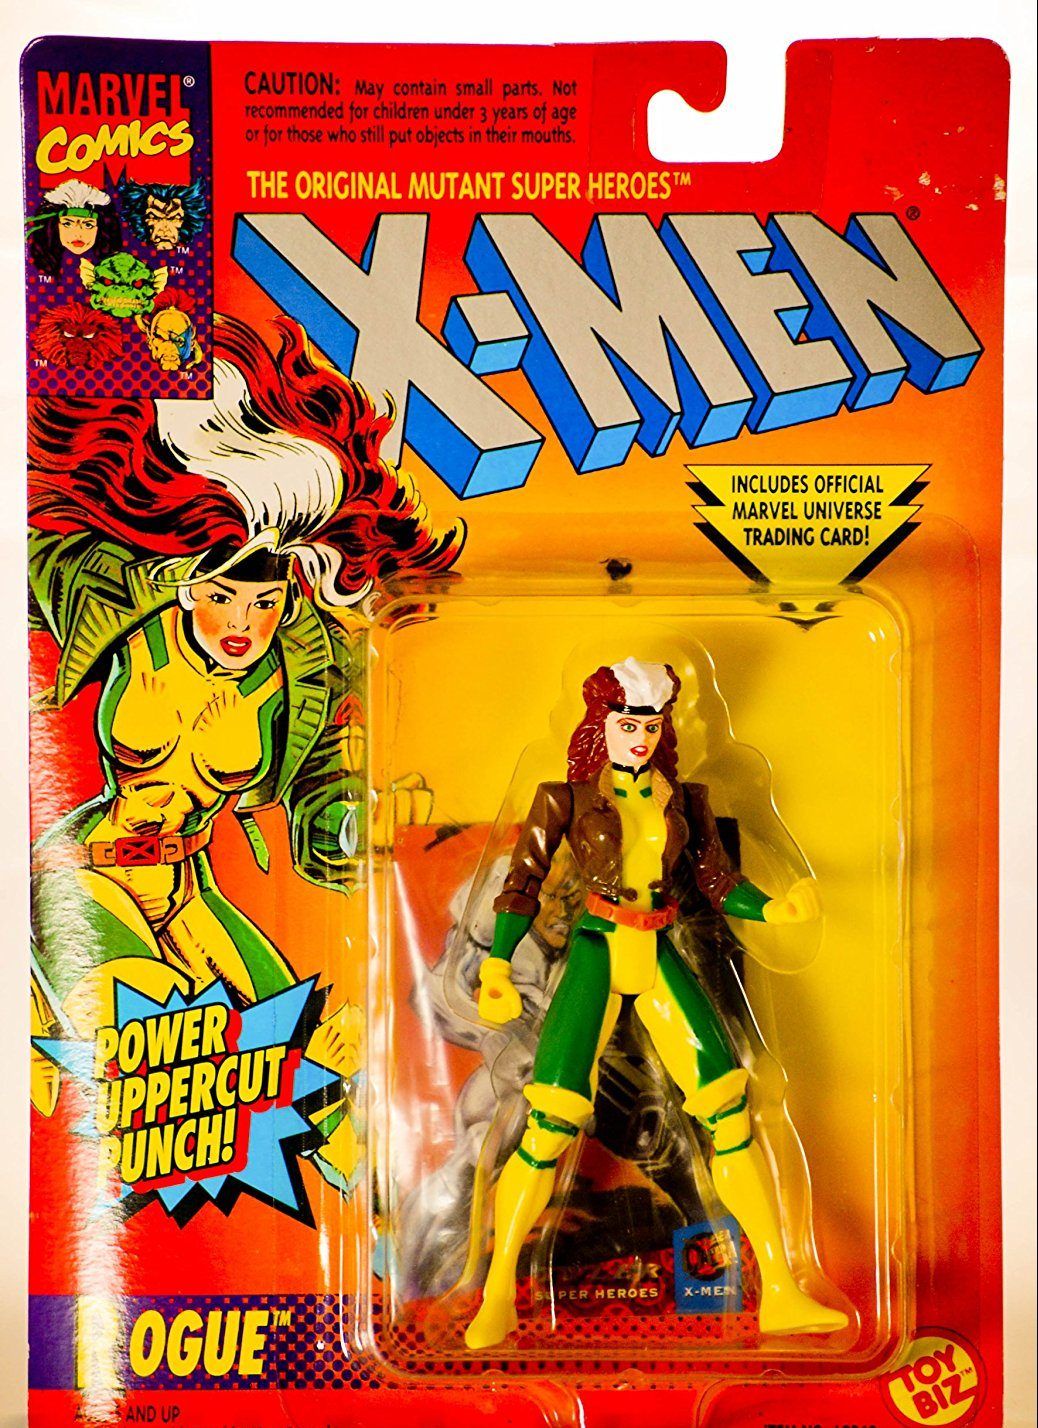 25 Action Figures From The 90s Worth A Fortune Today